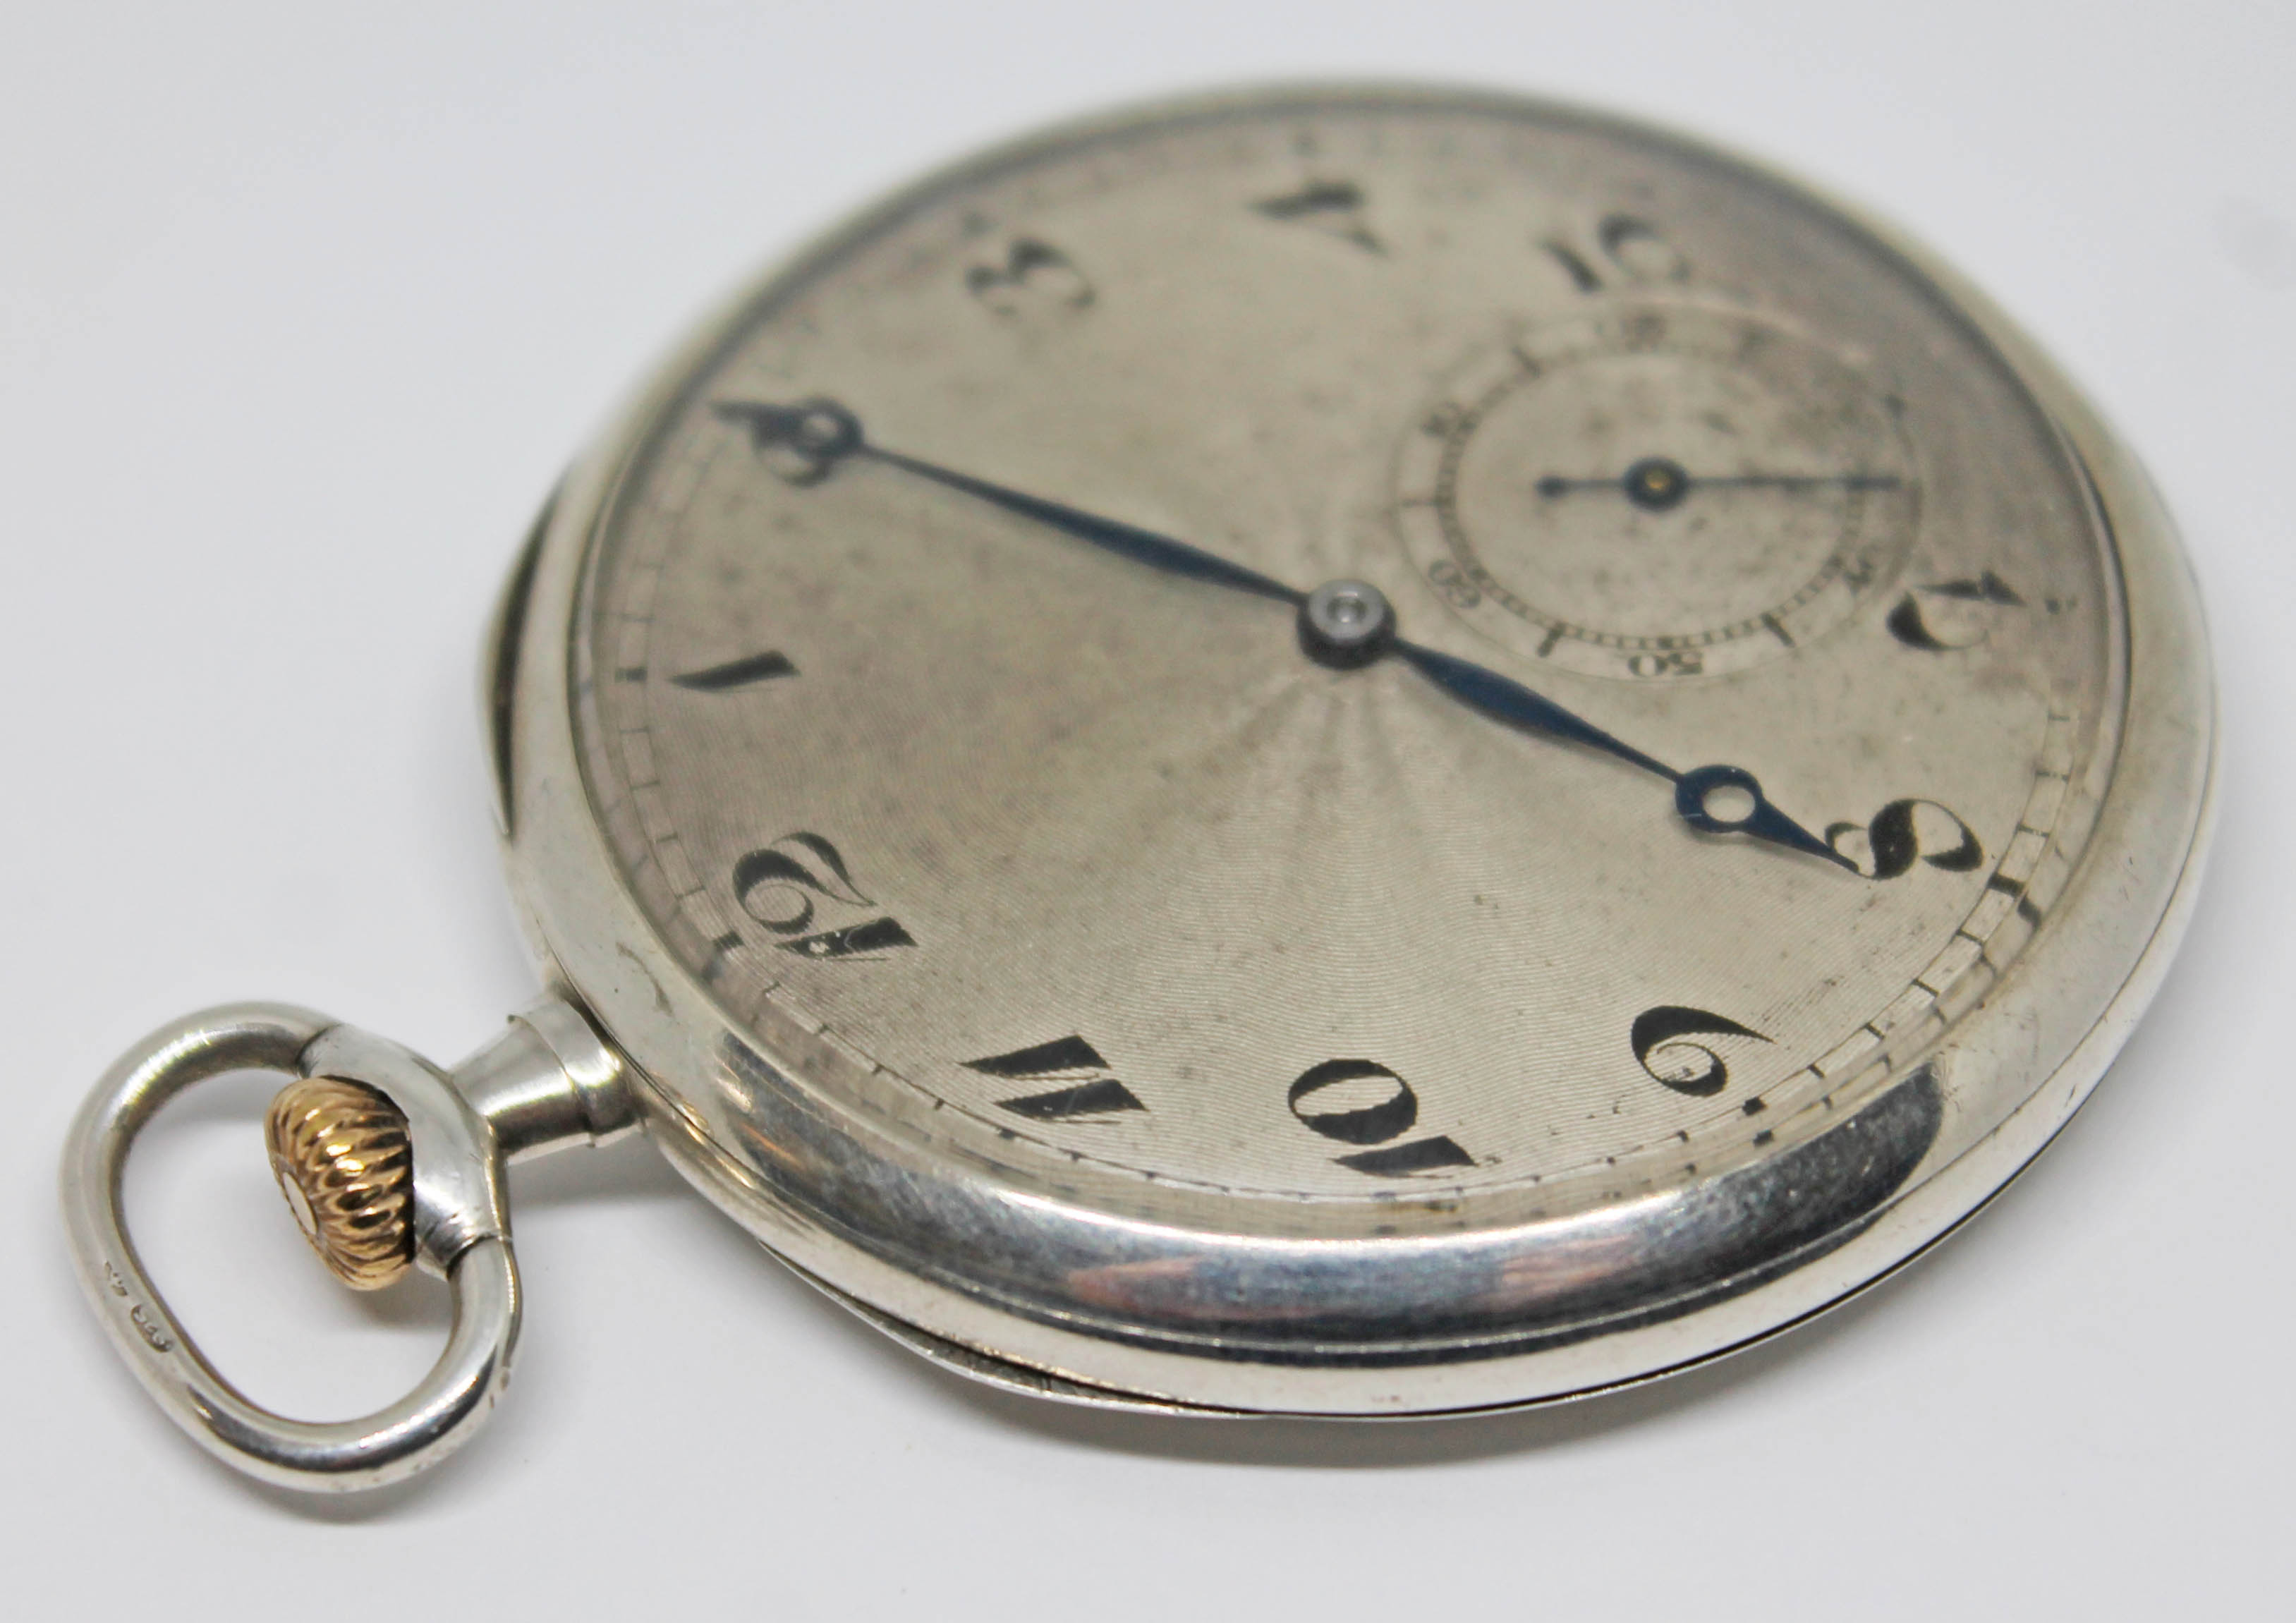 A 1920s silver cased pocket watch with silver tone guilloche dial, Arabic numerals and breguet hands